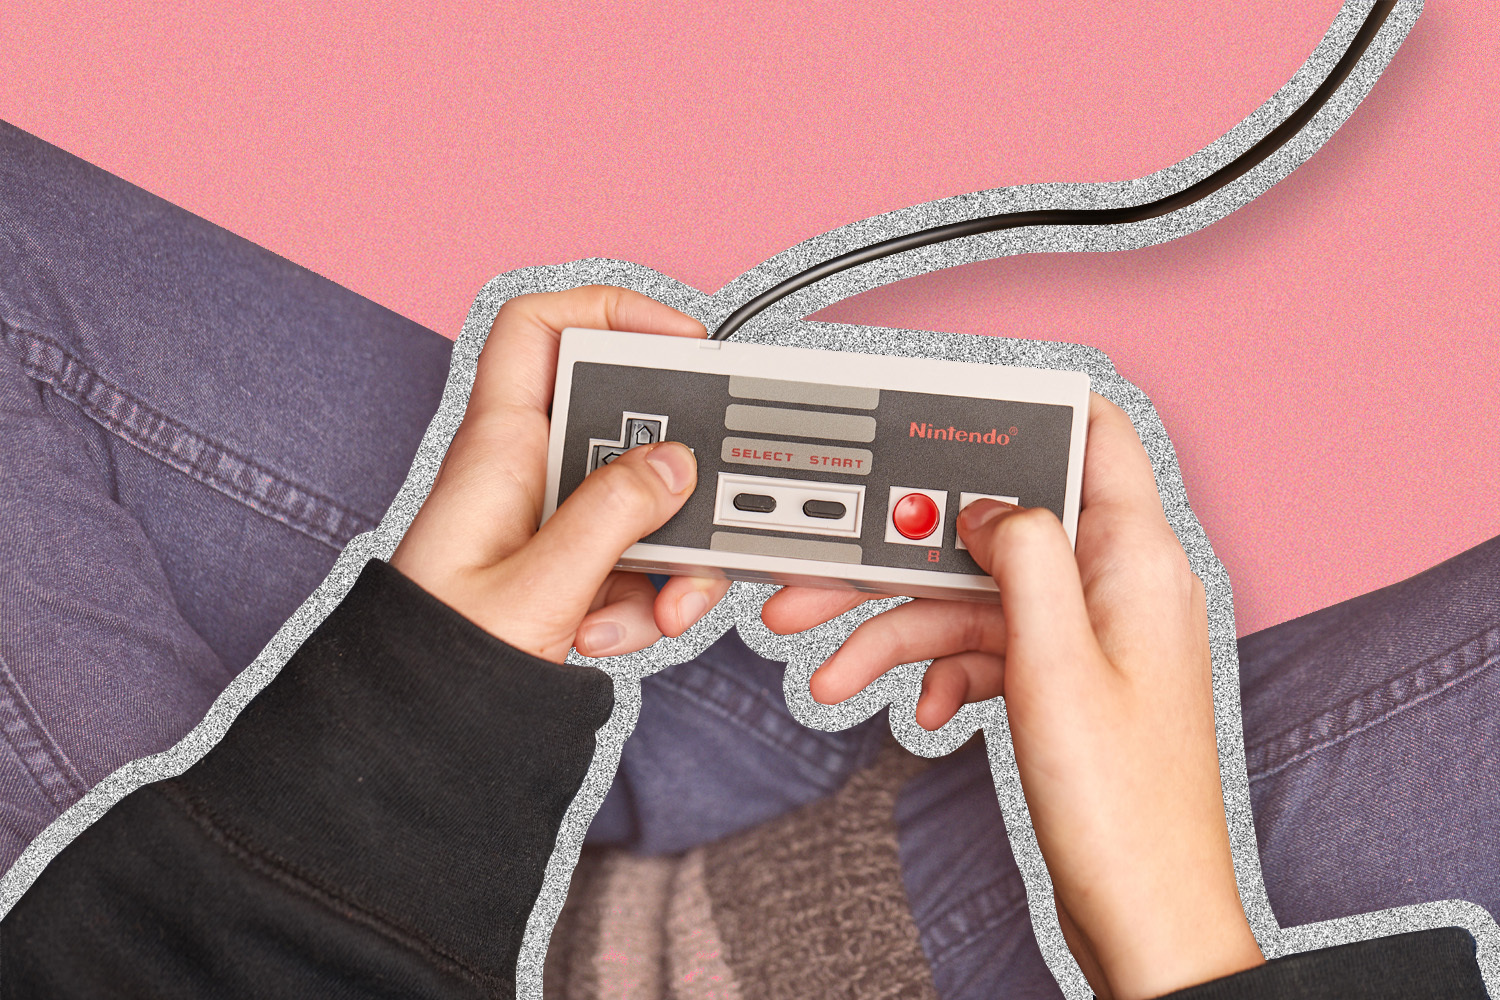 Hands holding original Nintendo console on a red background